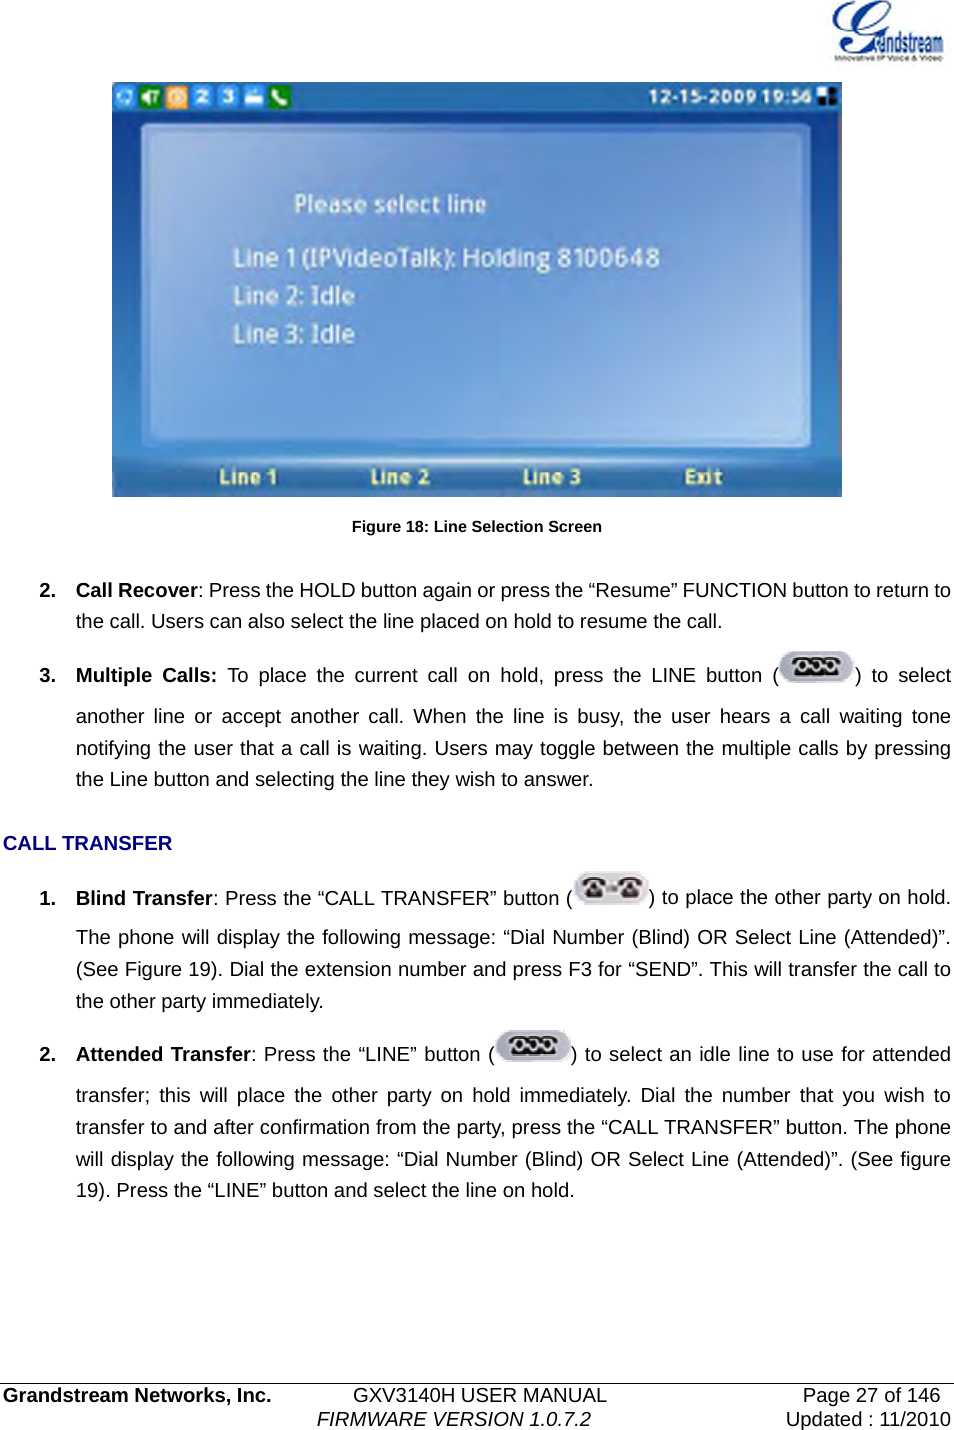   Grandstream Networks, Inc.        GXV3140H USER MANUAL                  Page 27 of 146                                FIRMWARE VERSION 1.0.7.2 Updated : 11/2010   Figure 18: Line Selection Screen  2. Call Recover: Press the HOLD button again or press the “Resume” FUNCTION button to return to the call. Users can also select the line placed on hold to resume the call. 3. Multiple Calls: To place the current call on hold, press the LINE button ( ) to select another line or accept another call. When the line is busy, the user hears a call waiting tone notifying the user that a call is waiting. Users may toggle between the multiple calls by pressing the Line button and selecting the line they wish to answer.  CALL TRANSFER 1. Blind Transfer: Press the “CALL TRANSFER” button ( ) to place the other party on hold. The phone will display the following message: “Dial Number (Blind) OR Select Line (Attended)”. (See Figure 19). Dial the extension number and press F3 for “SEND”. This will transfer the call to the other party immediately. 2. Attended Transfer: Press the “LINE” button ( ) to select an idle line to use for attended transfer; this will place the other party on hold immediately. Dial the number that you wish to transfer to and after confirmation from the party, press the “CALL TRANSFER” button. The phone will display the following message: “Dial Number (Blind) OR Select Line (Attended)”. (See figure 19). Press the “LINE” button and select the line on hold.    